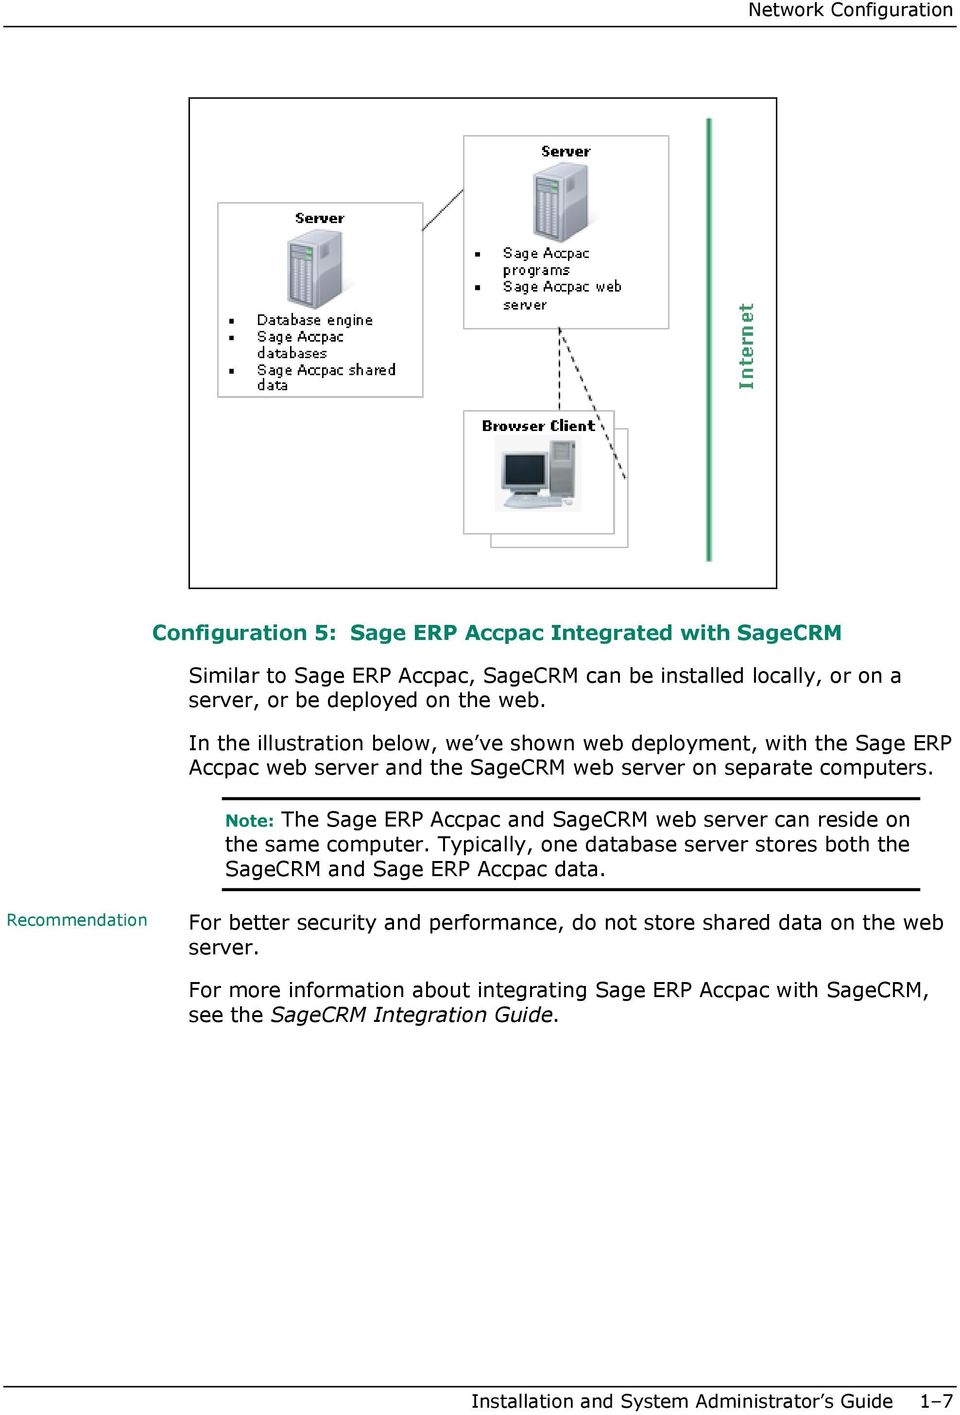 Note: The Sage ERP Accpac and SageCRM web server can reside on the same computer. Typically, one database server stores both the SageCRM and Sage ERP Accpac data.